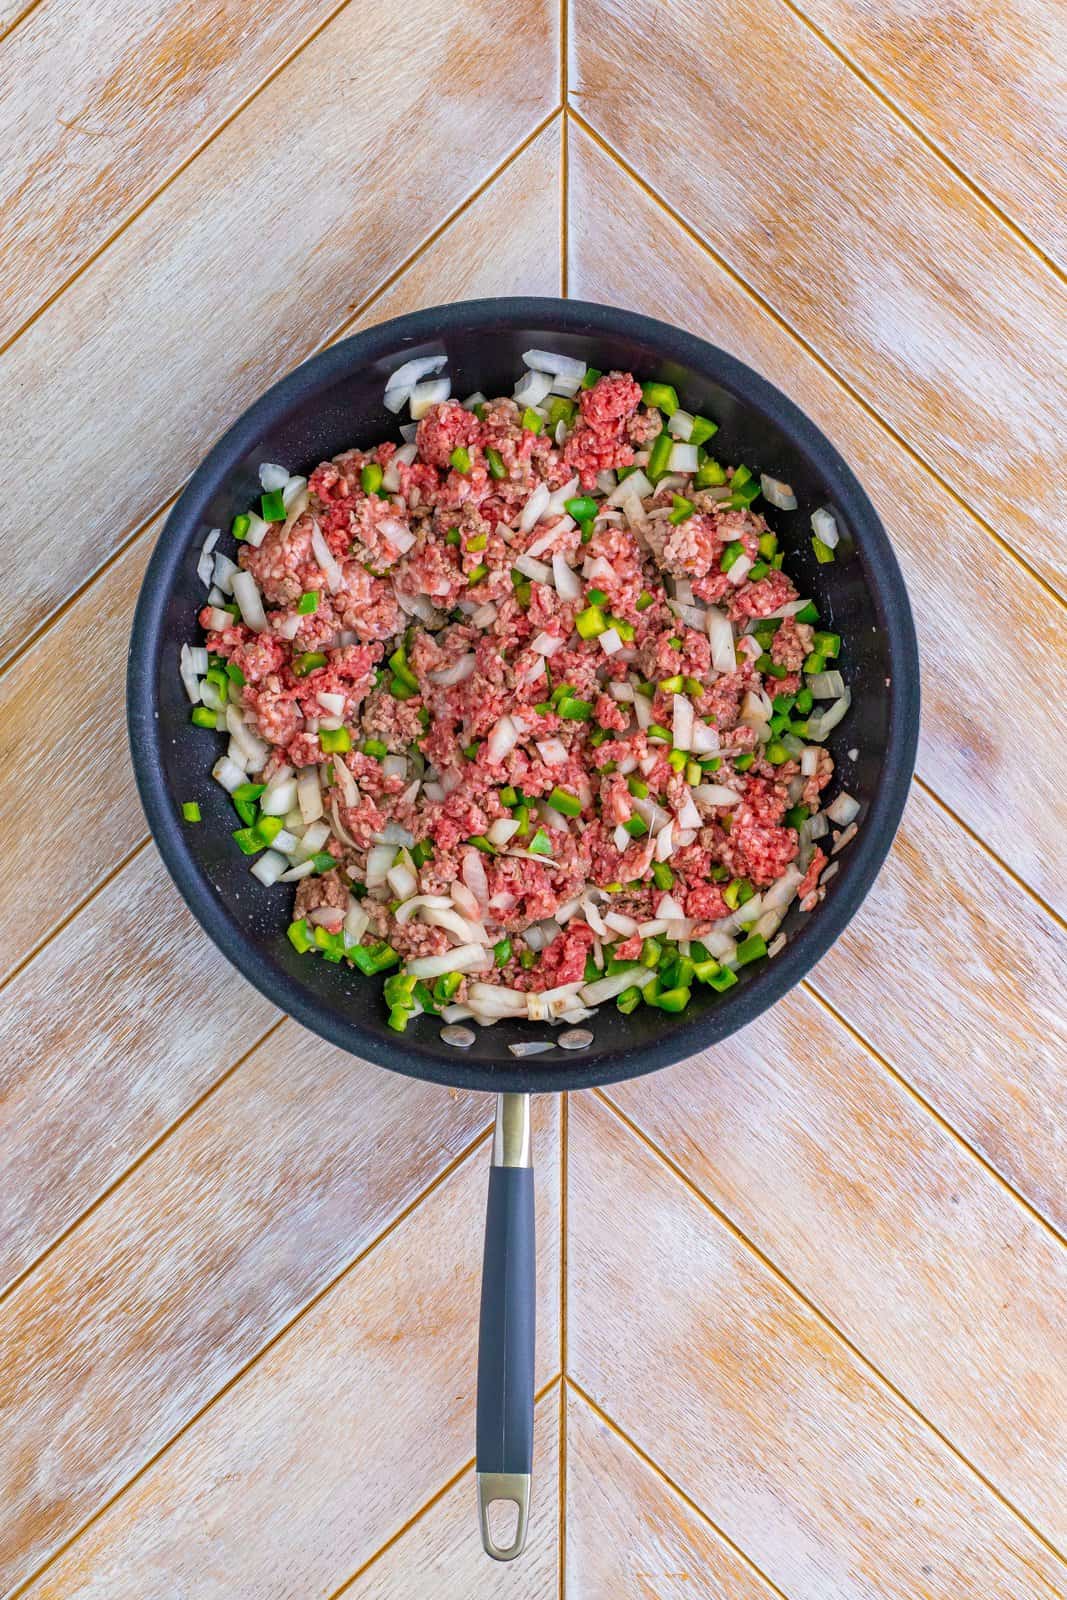 A skillet with ground beef and Italian sausage along with the onion and green pepper.